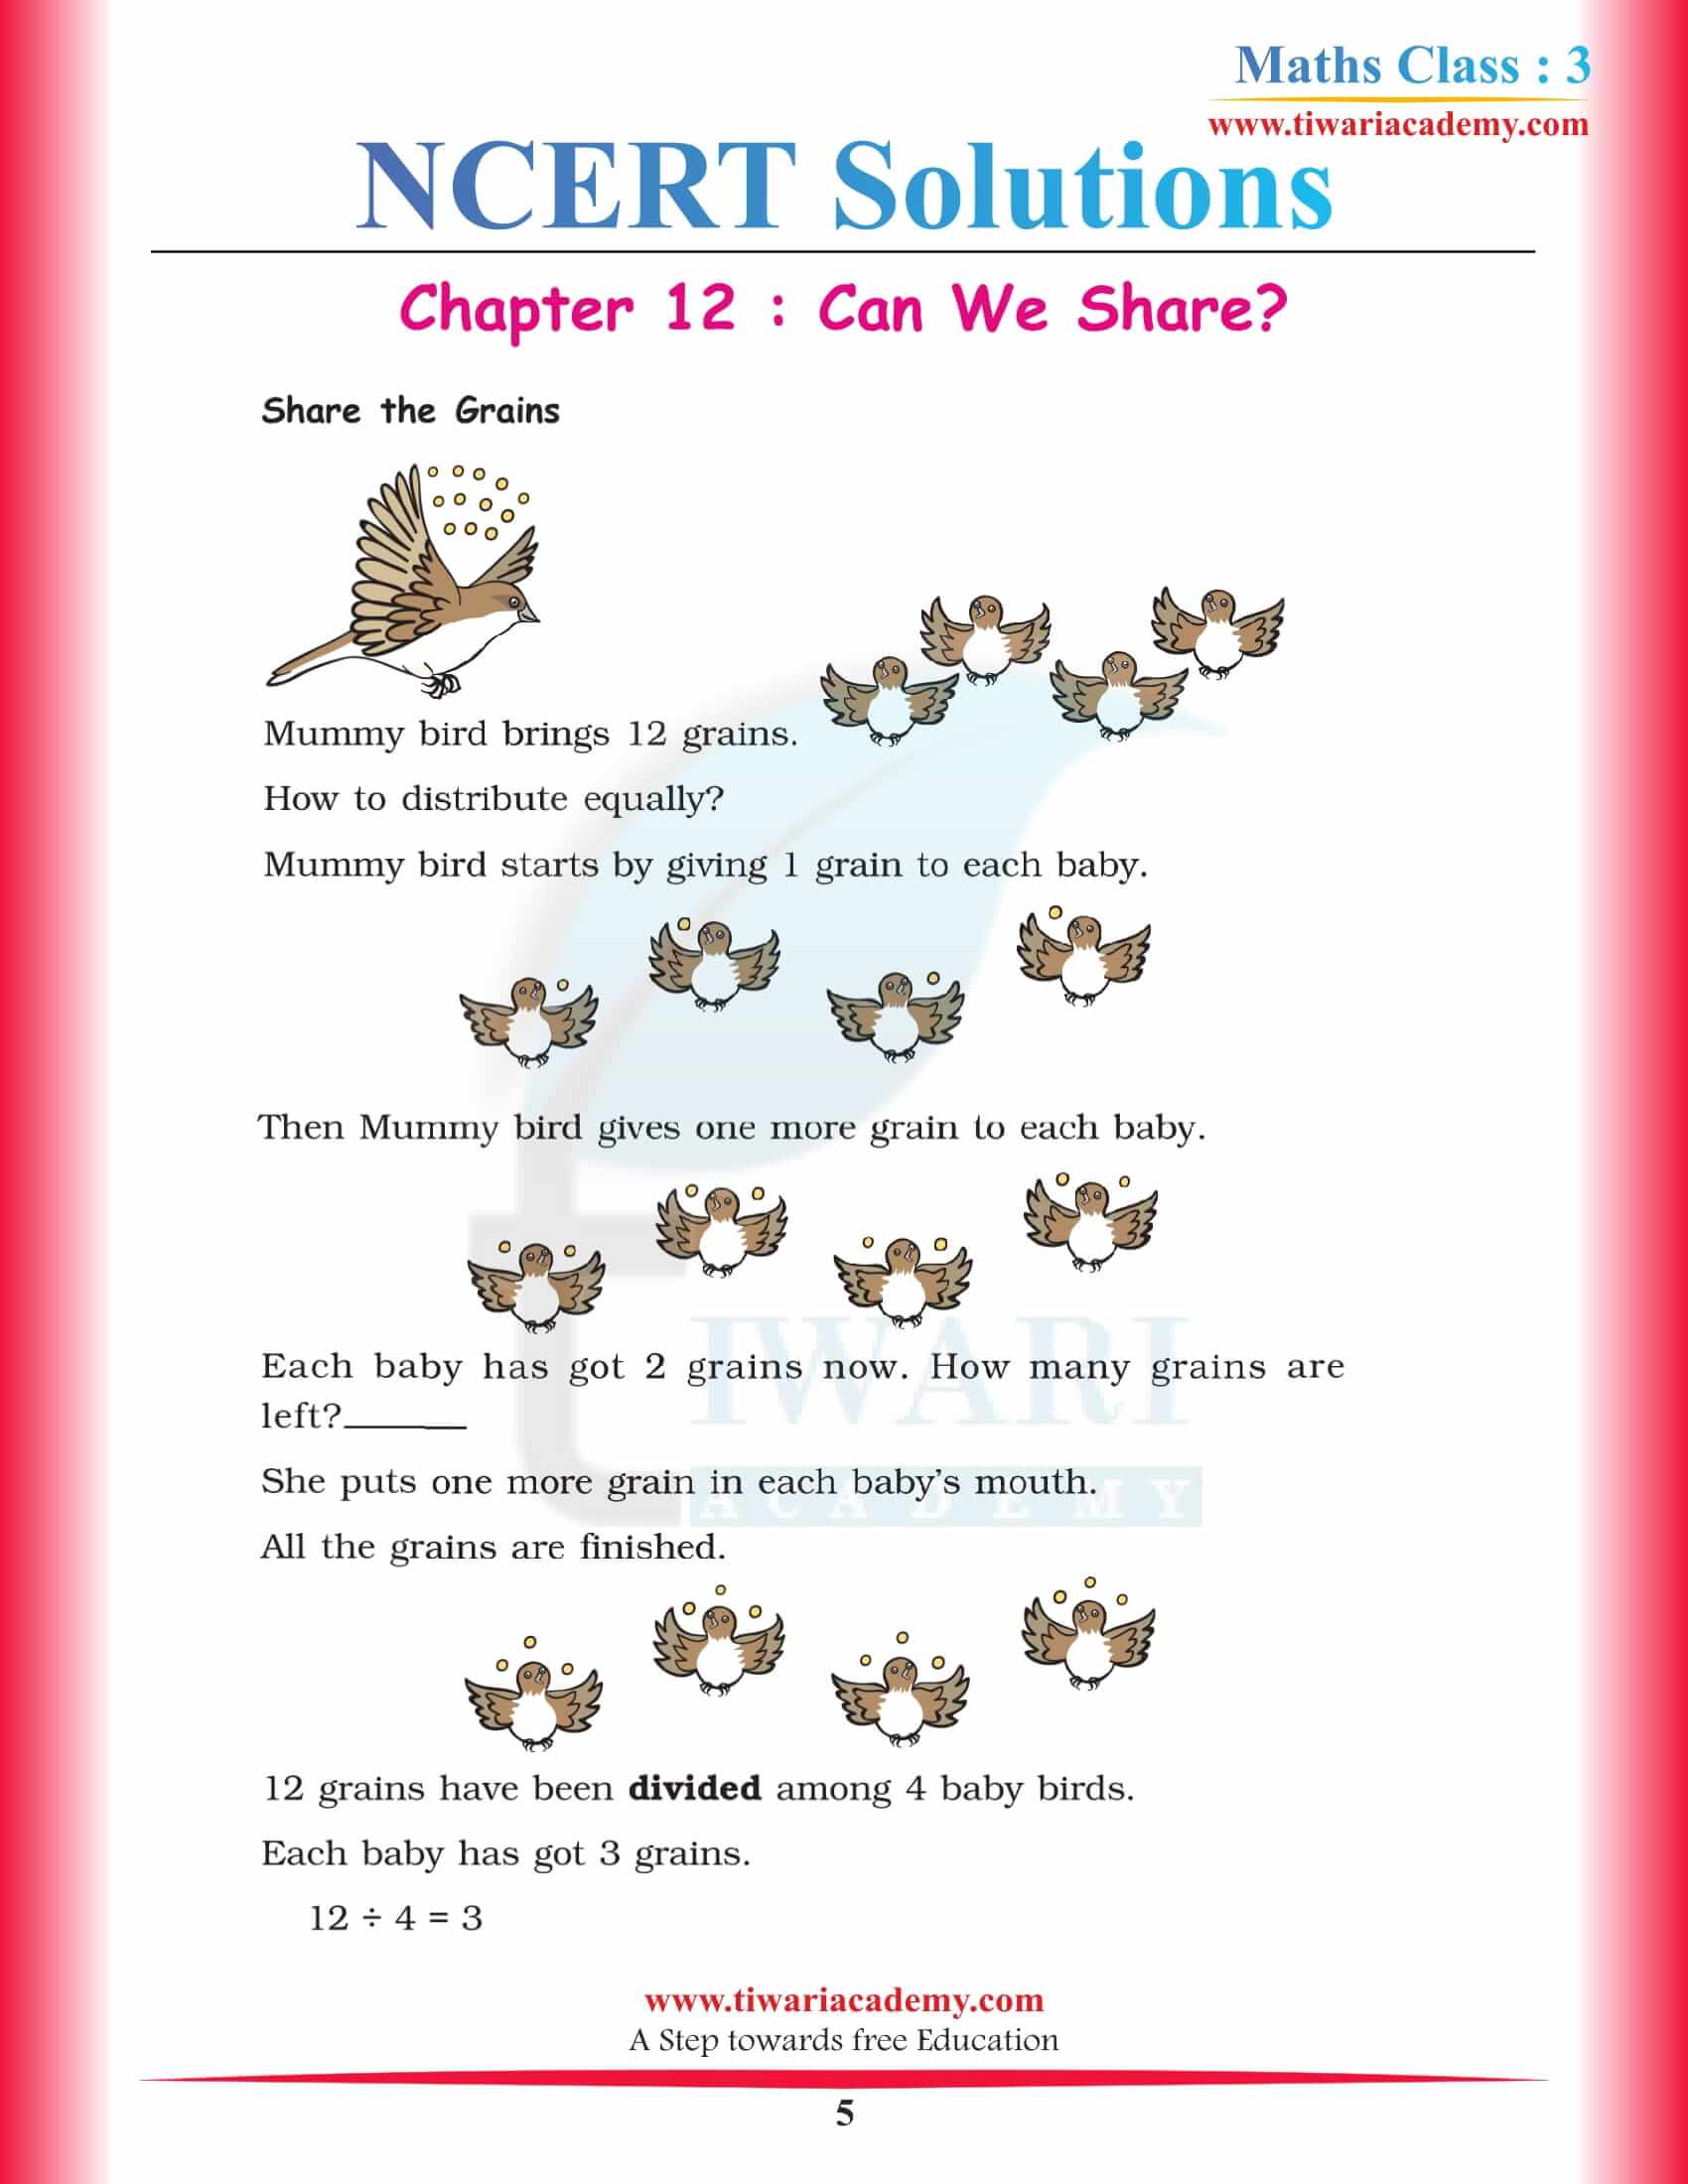 NCERT Solutions for Class 3 Maths Chapter 12 in English Medium